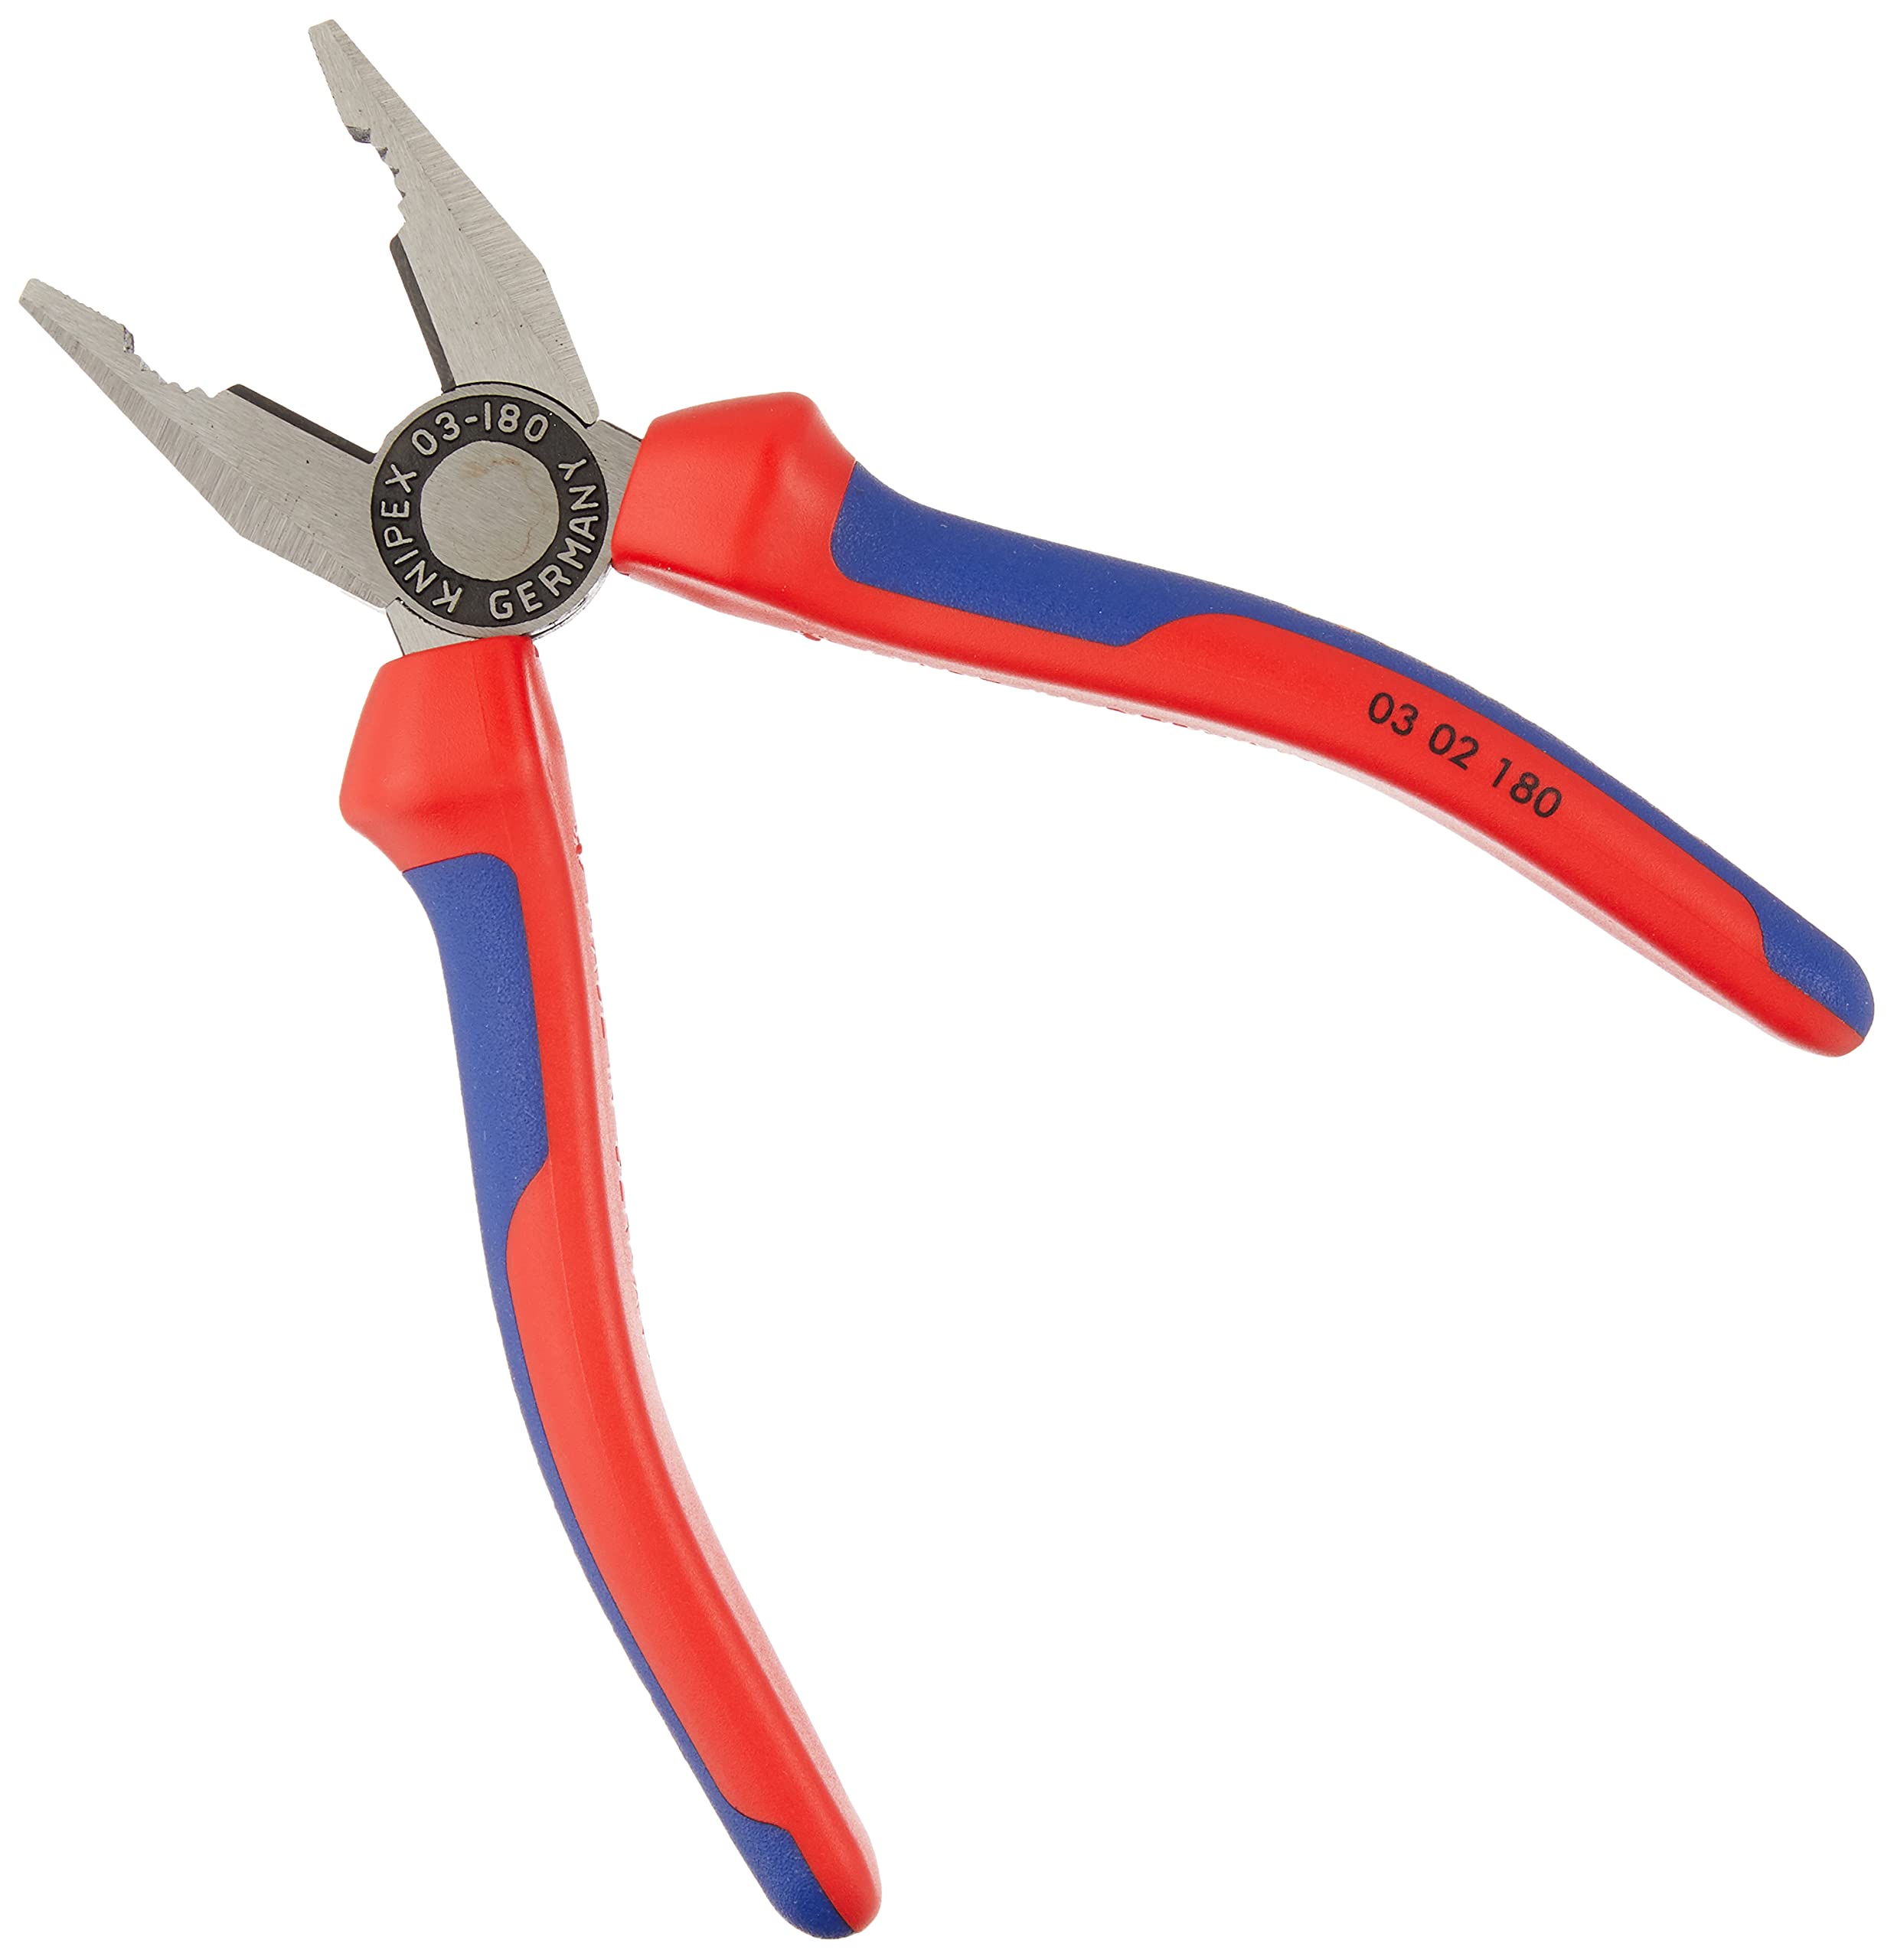 Knipex 03 02 180, 7 1/4-Inch Combination Lineman Pliers - Comfort Grip $21.04 at Amazon